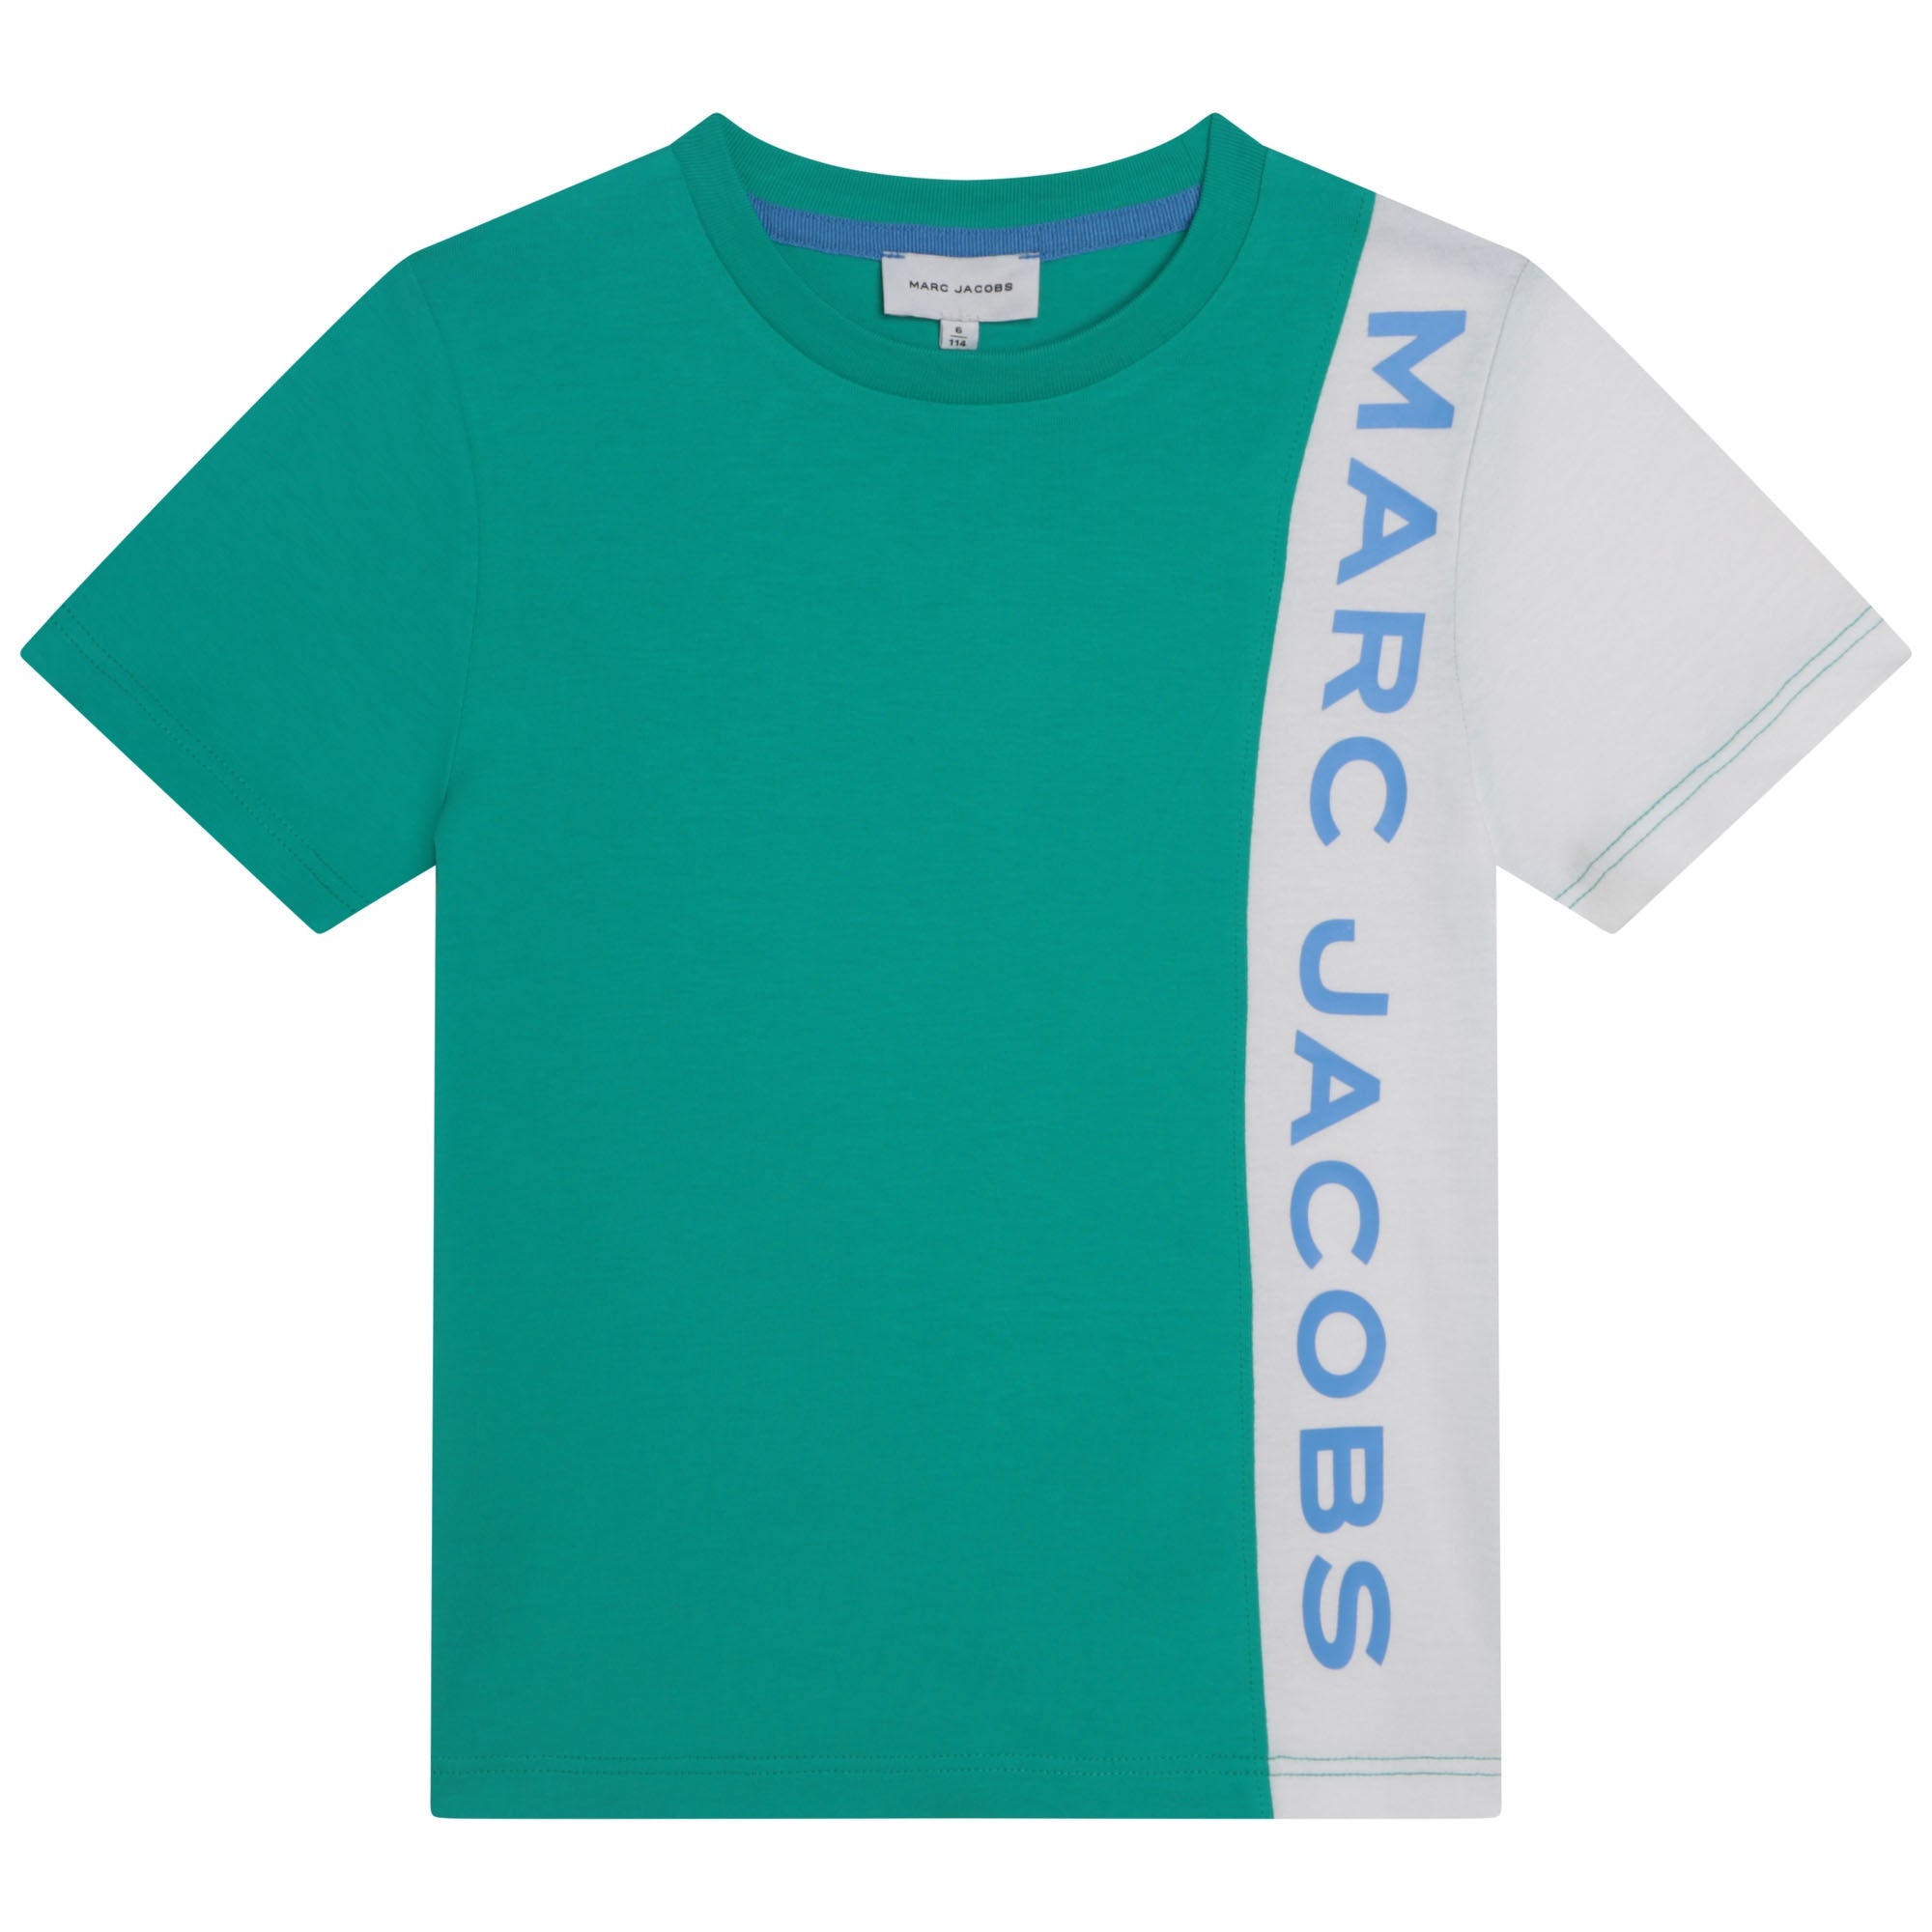 The Marc Jacobs SS T-shirt in Green & White